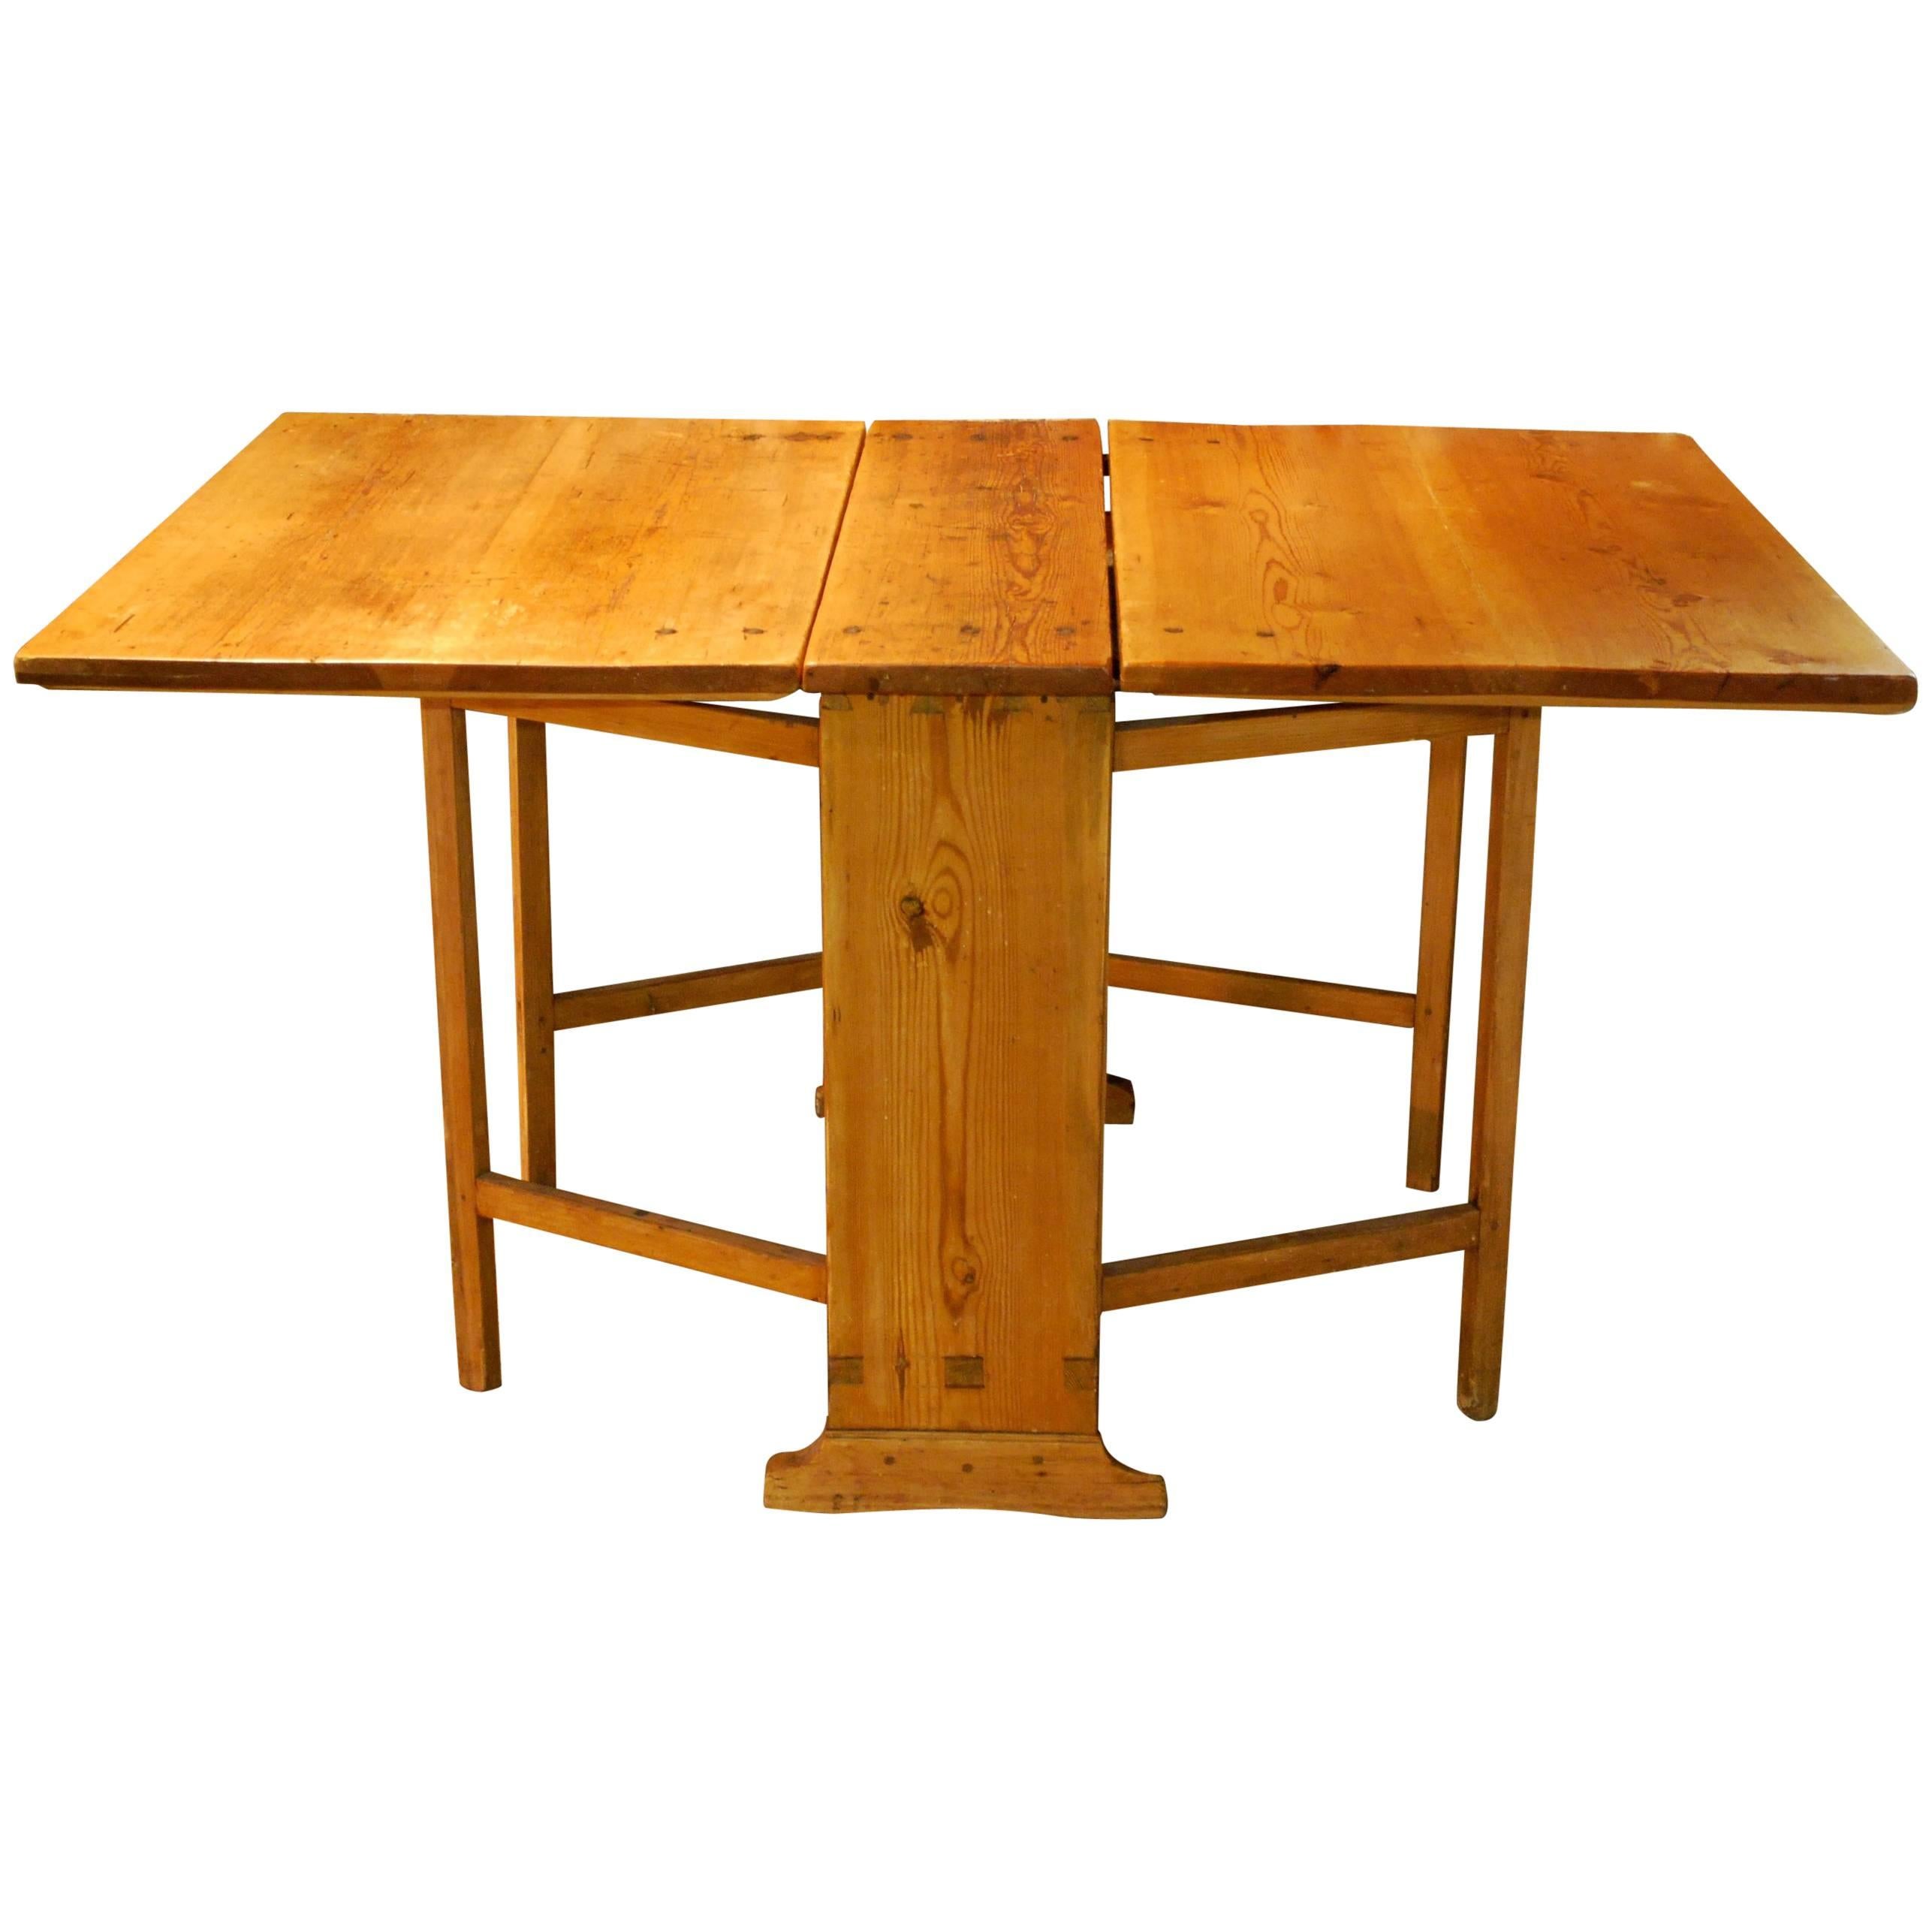 Antique Swedish Gate Leg Table, circa 1830 'Four Tables in One' For Sale